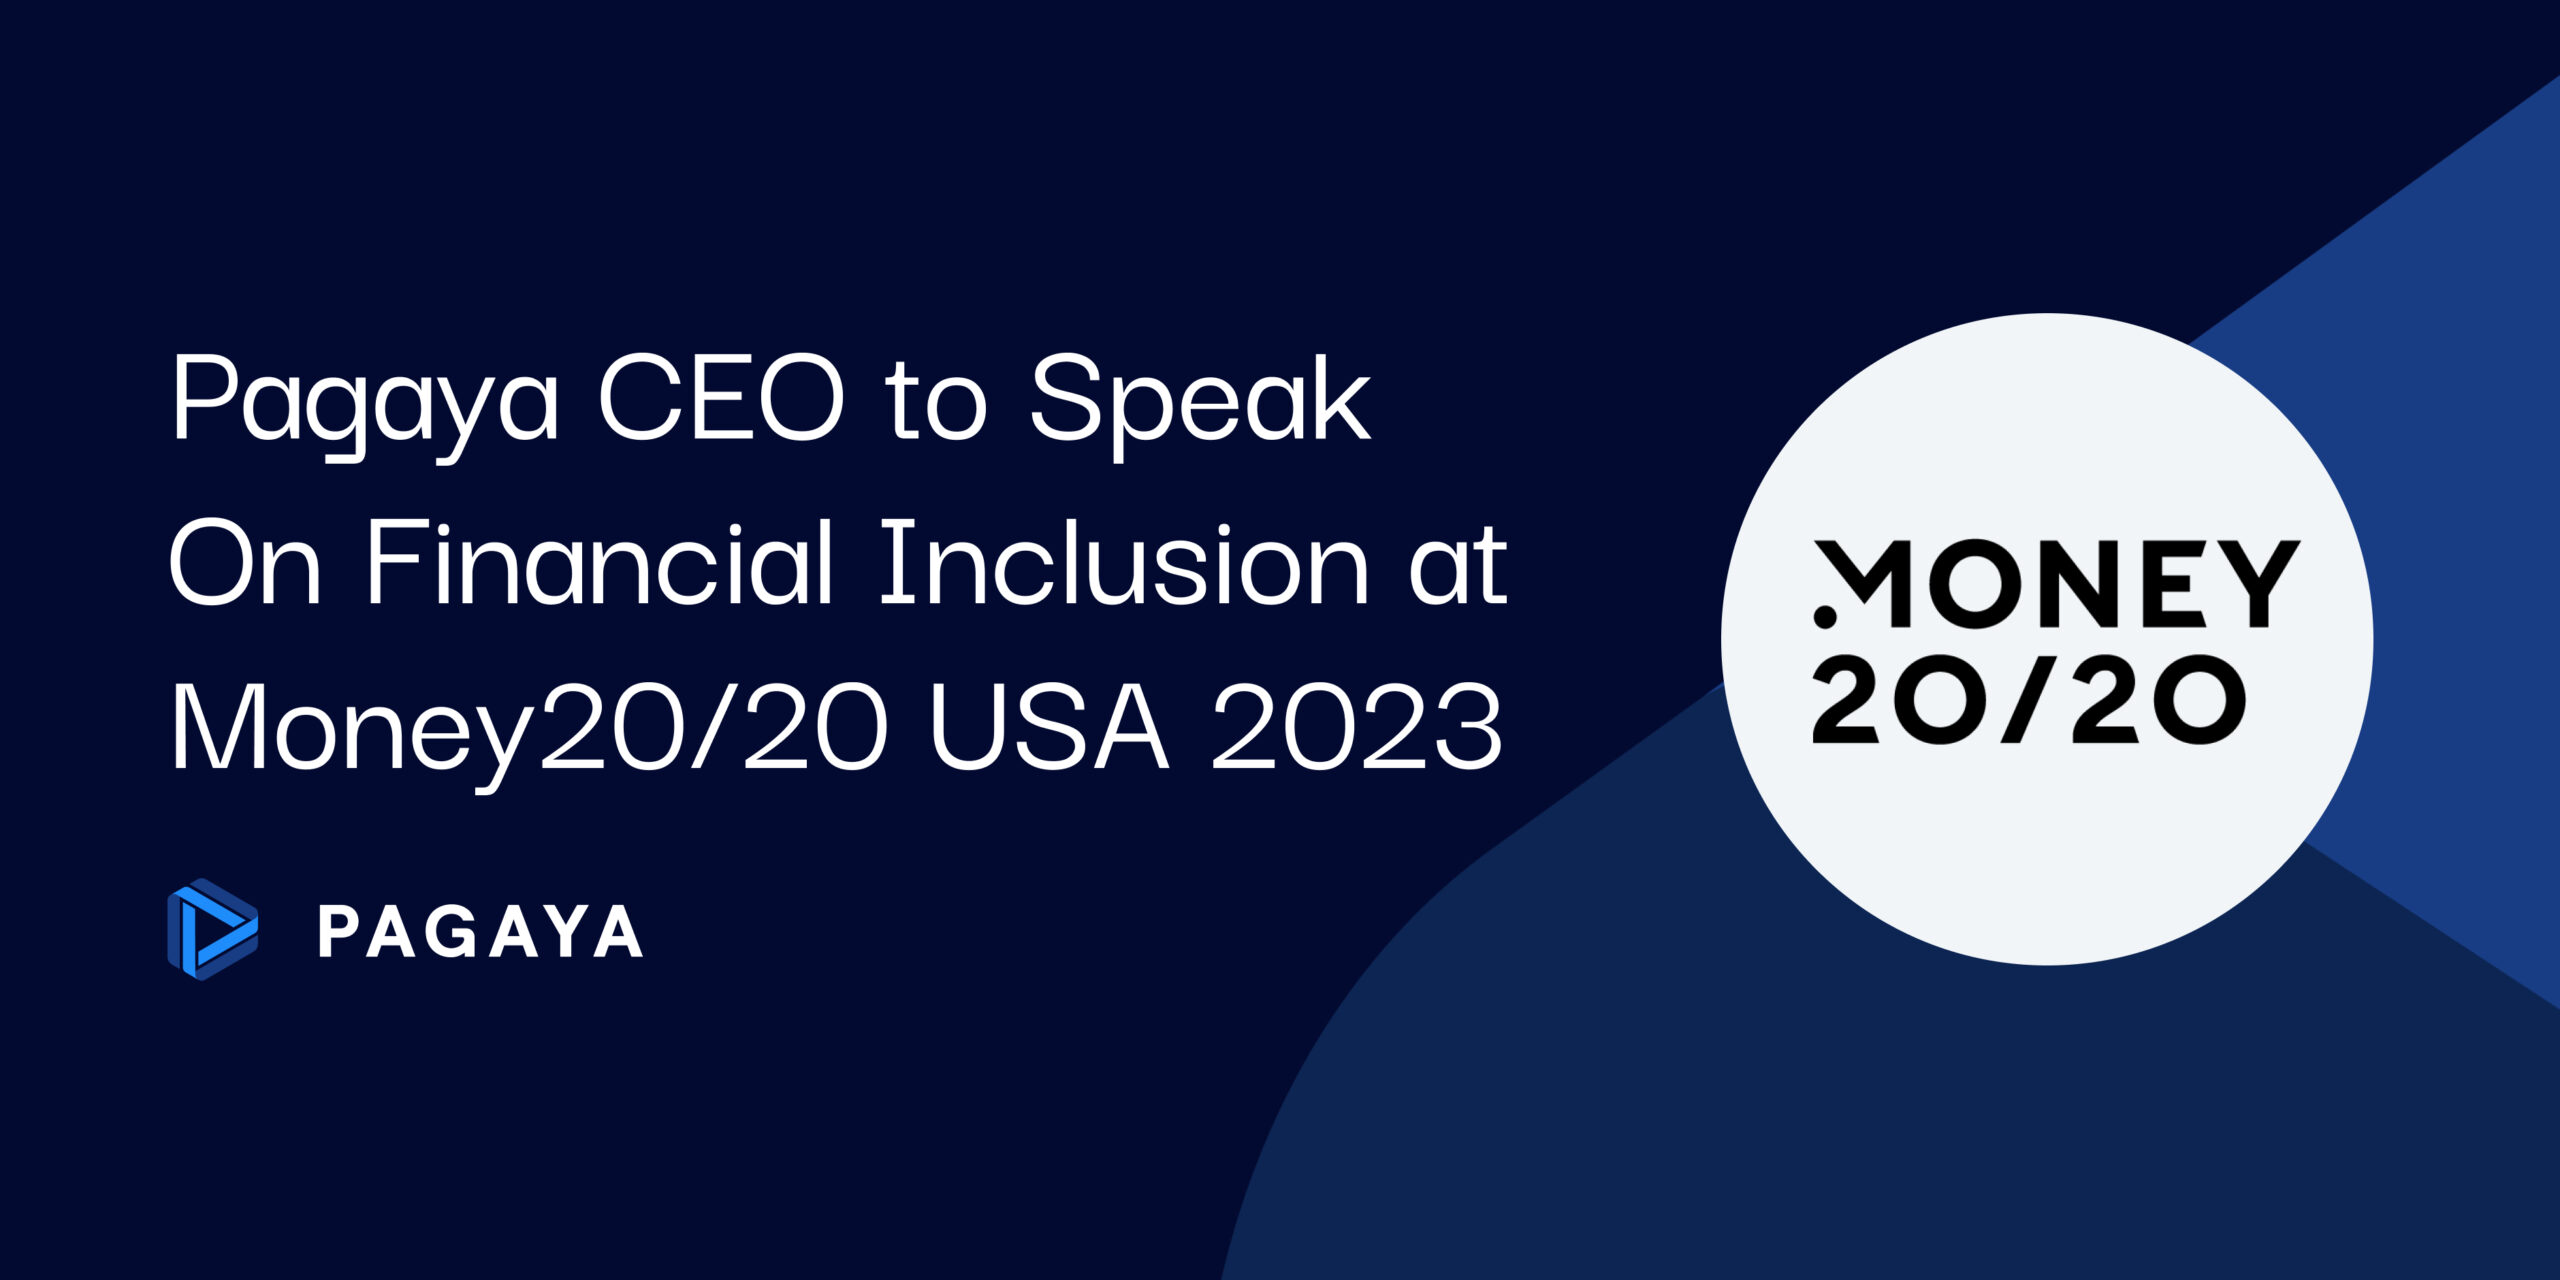 Pagaya CEO to Speak On Financial Inclusion at Money20/20 USA 2023